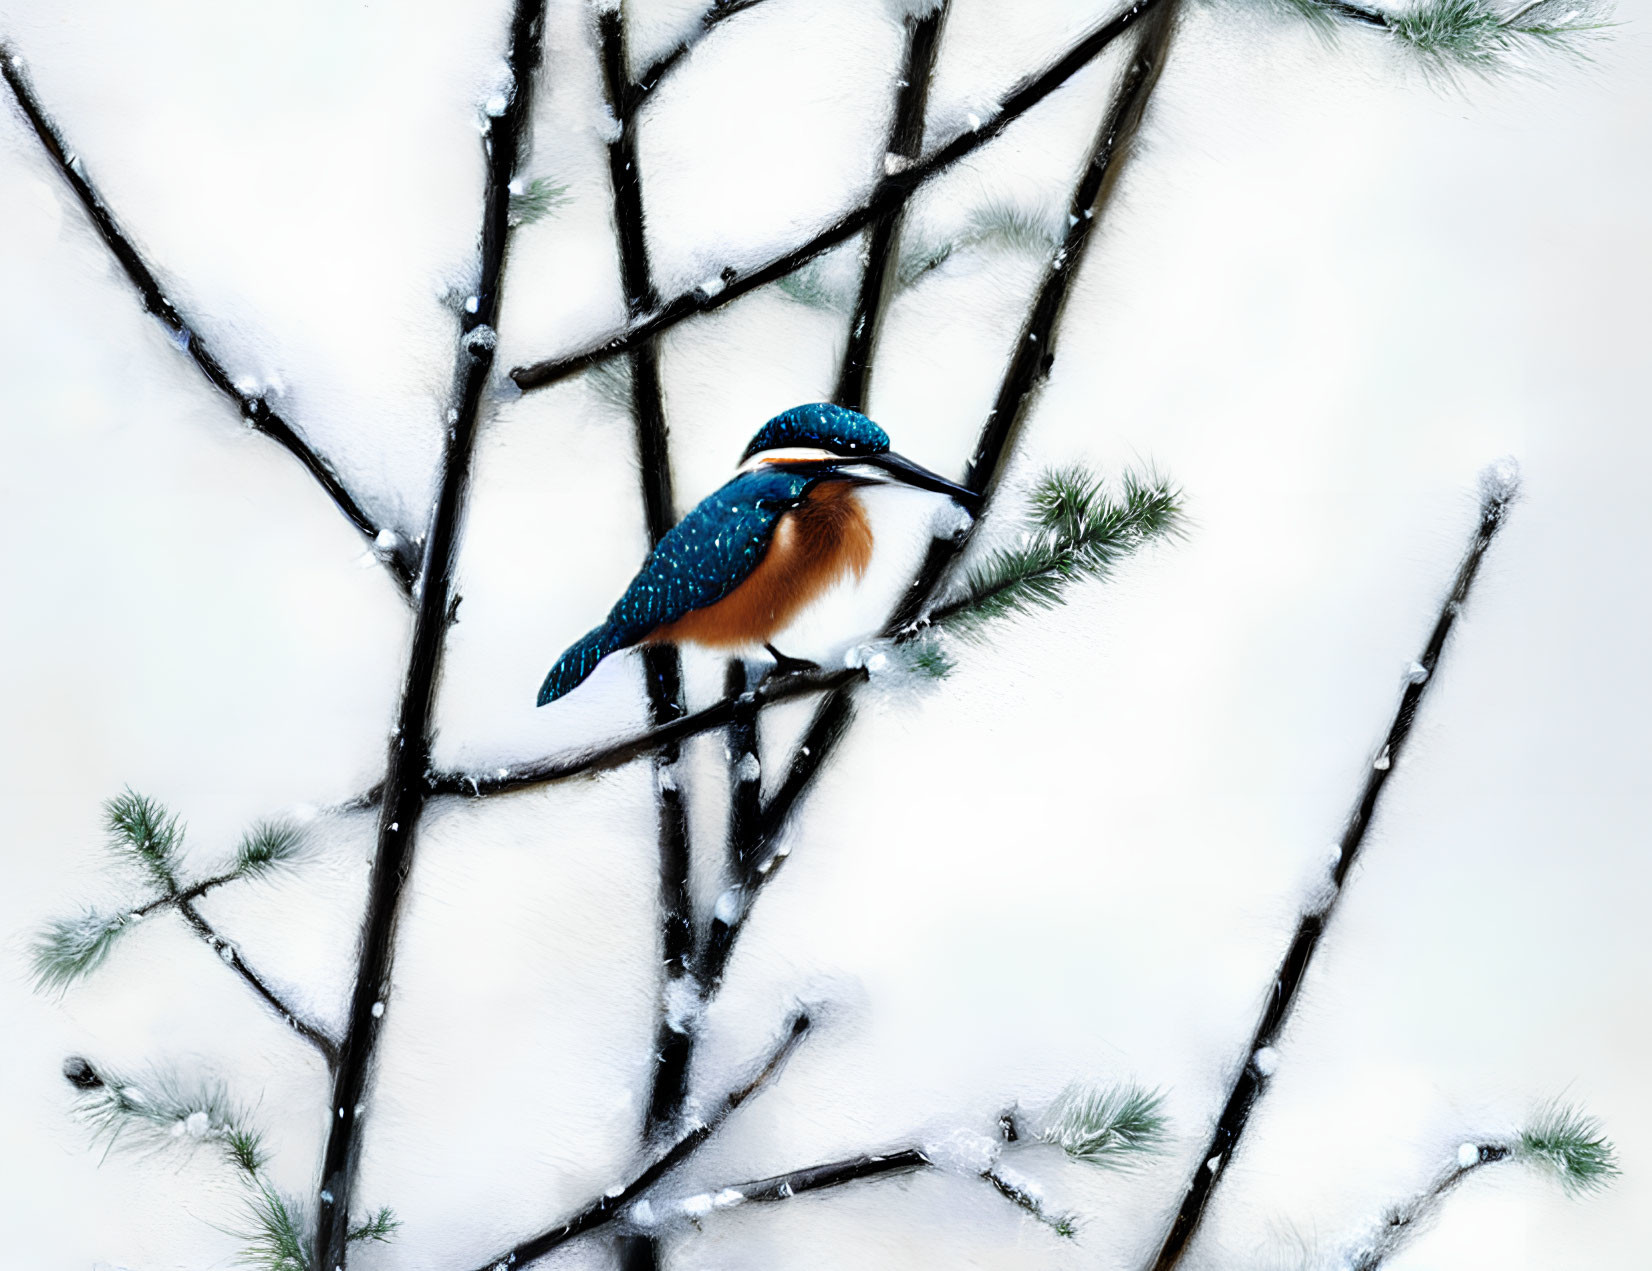 Kingfisher perched on snow-dusted branch in winter scene